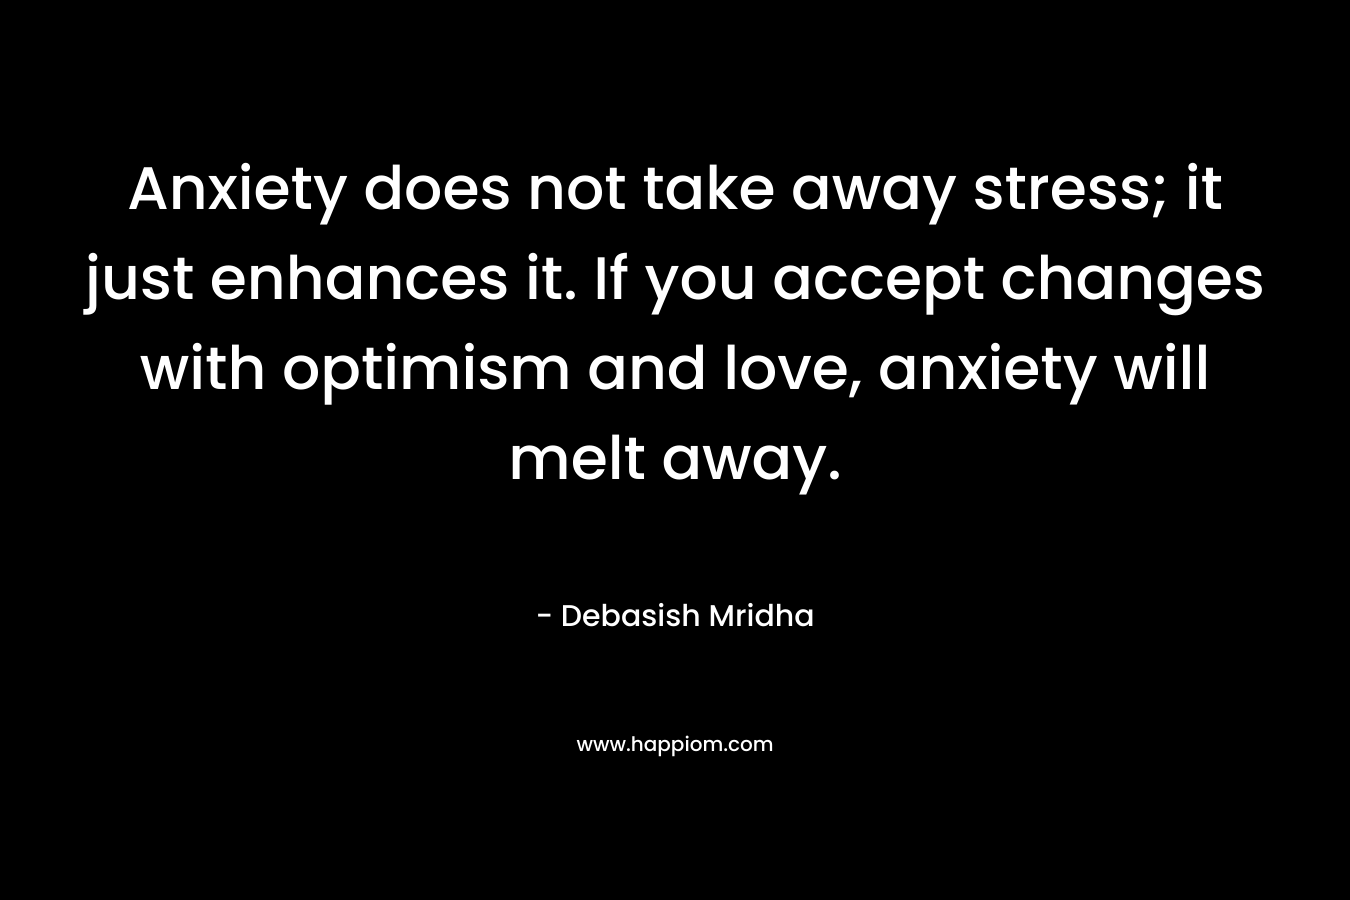 Anxiety does not take away stress; it just enhances it. If you accept changes with optimism and love, anxiety will melt away.